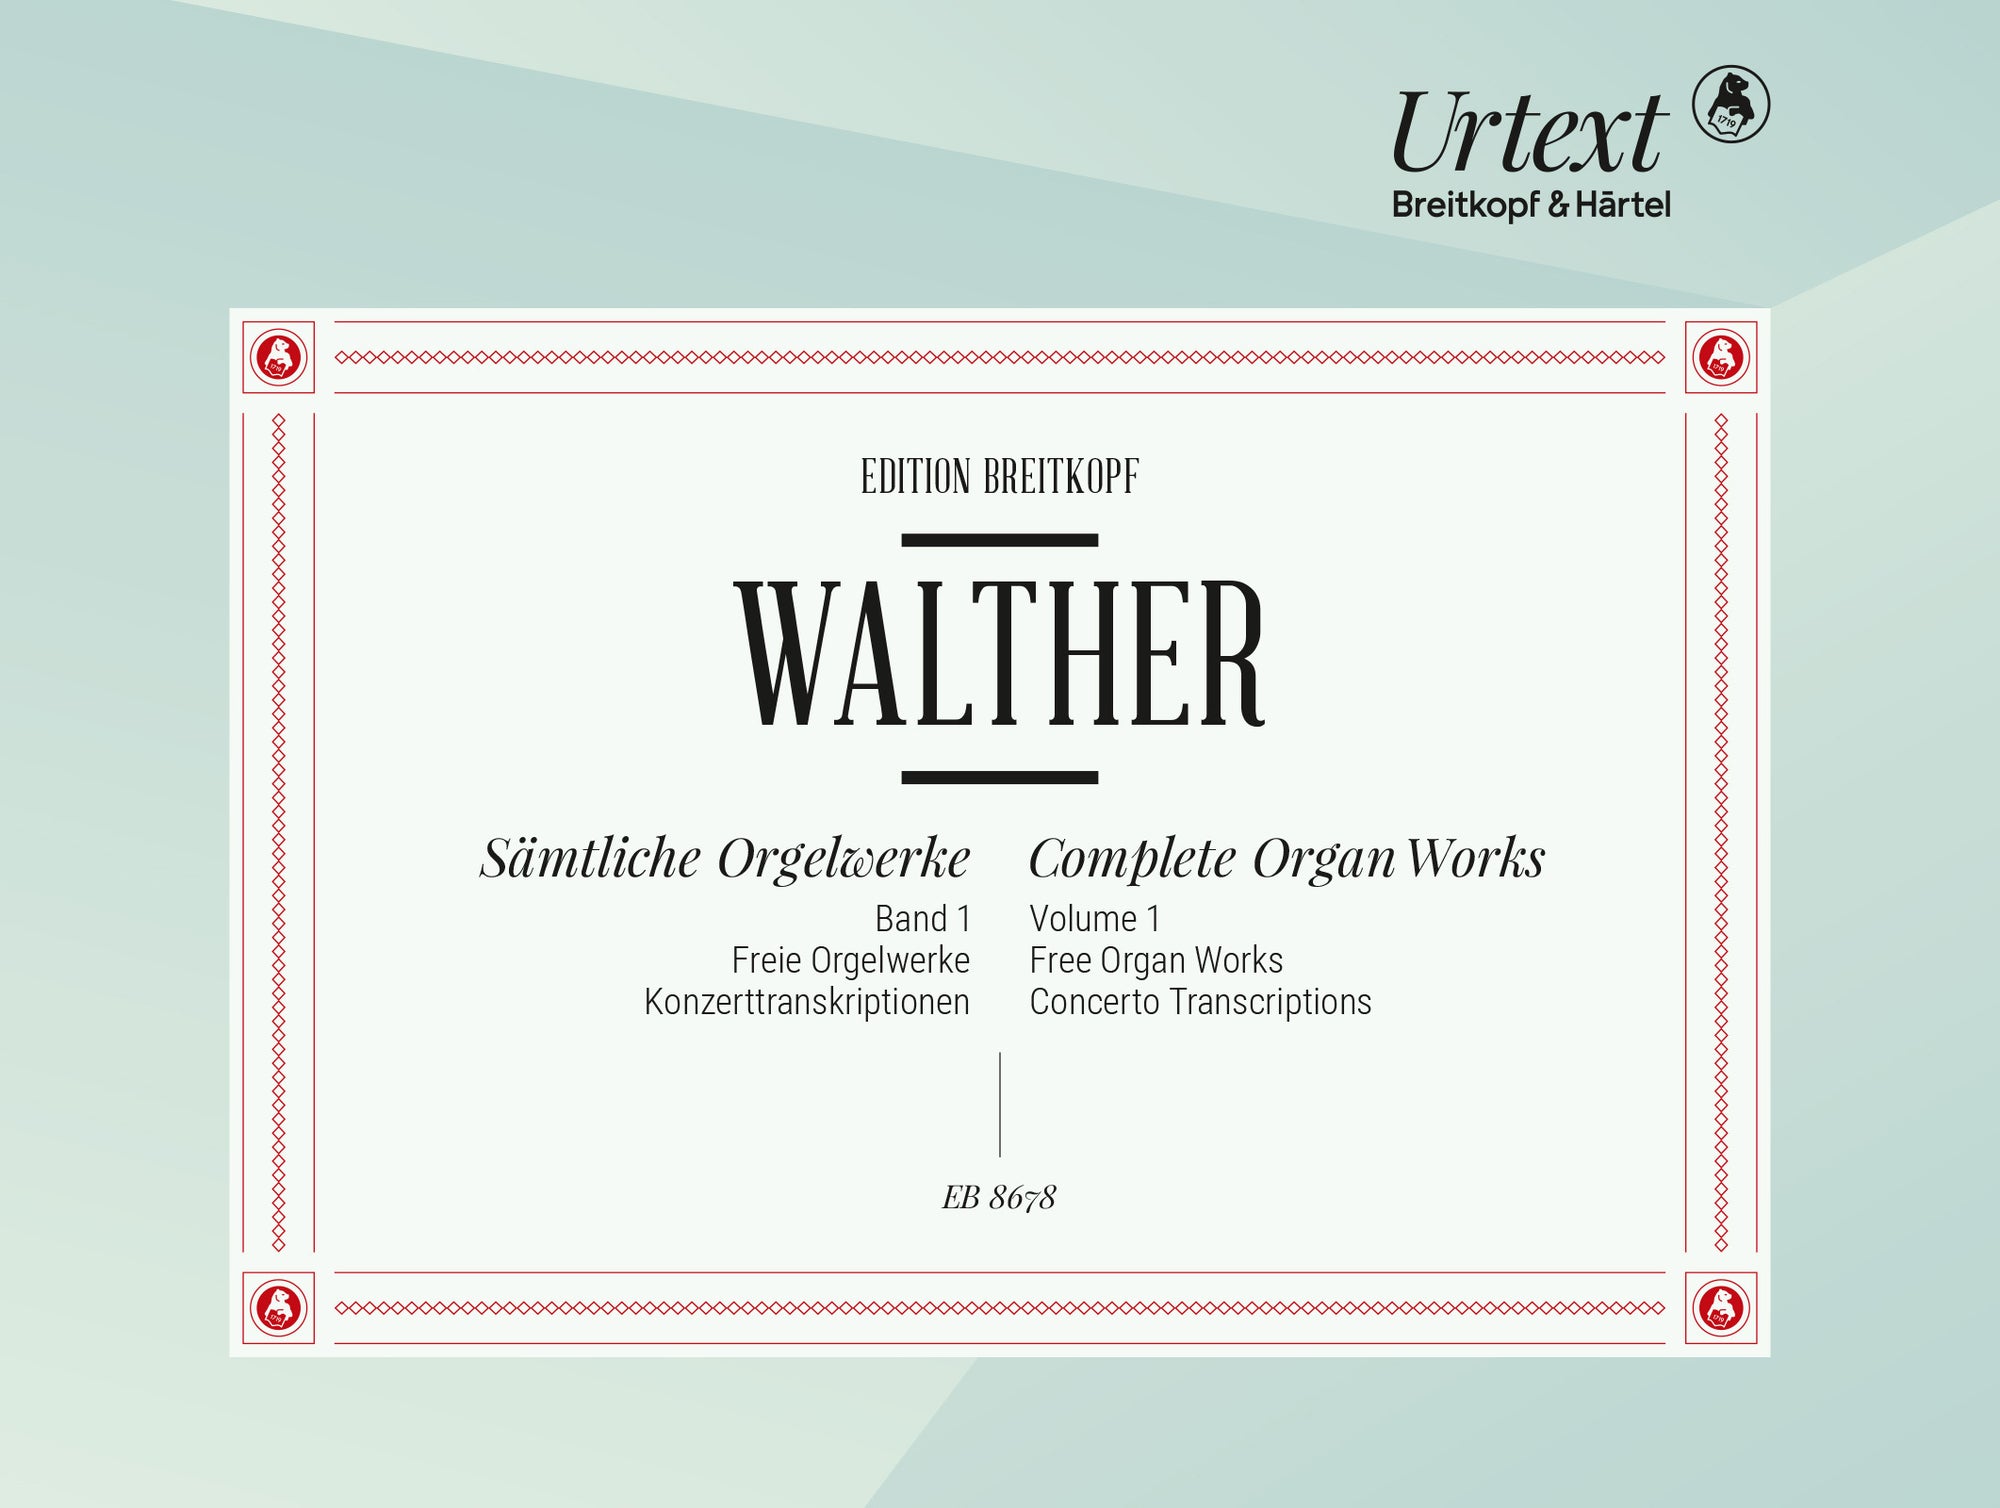 Walther: Free Organ Works and Concerti Transcriptions